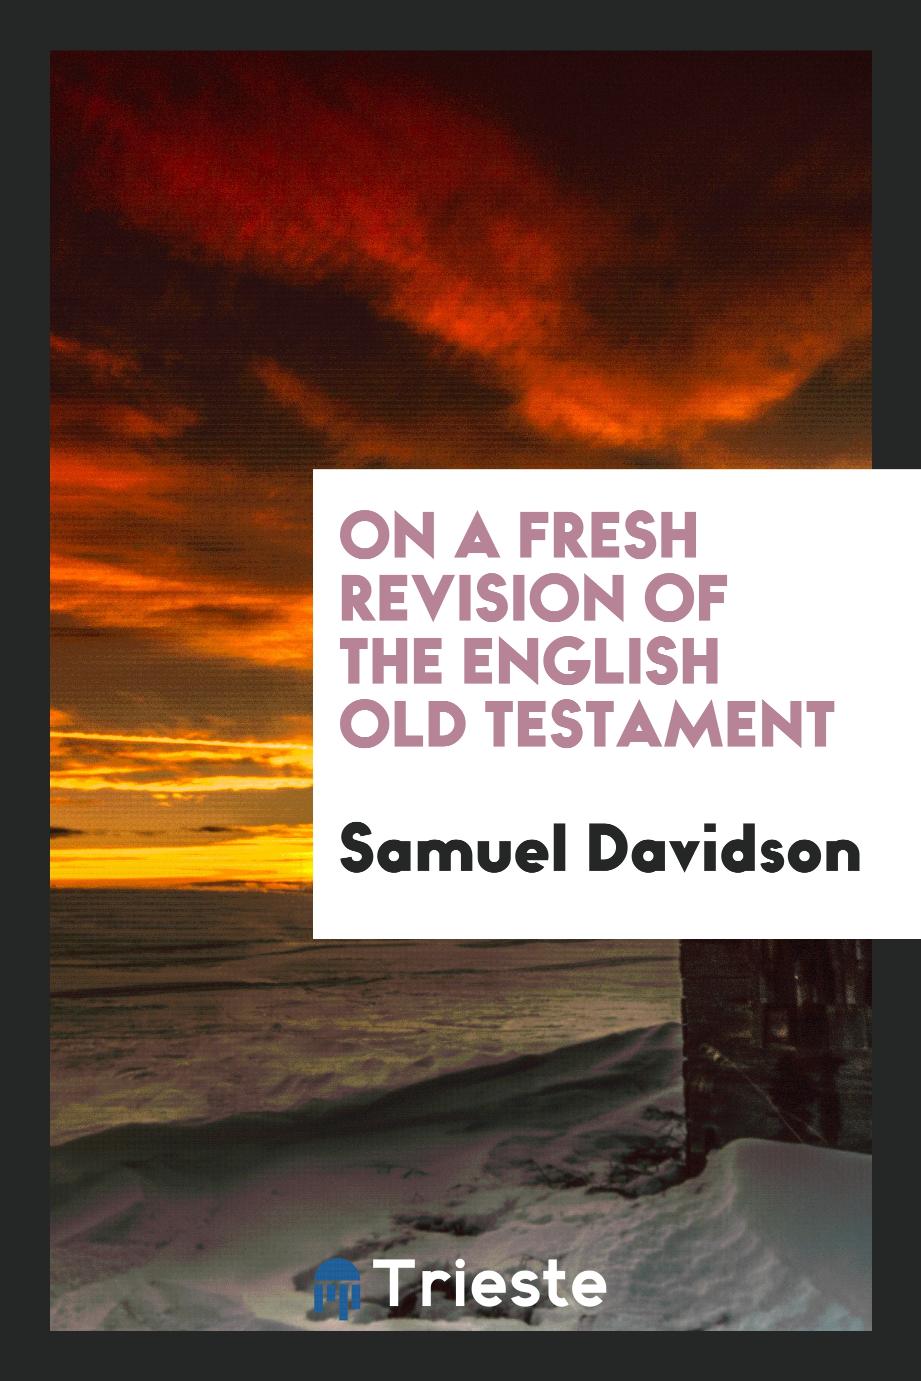 On a Fresh Revision of the English Old Testament